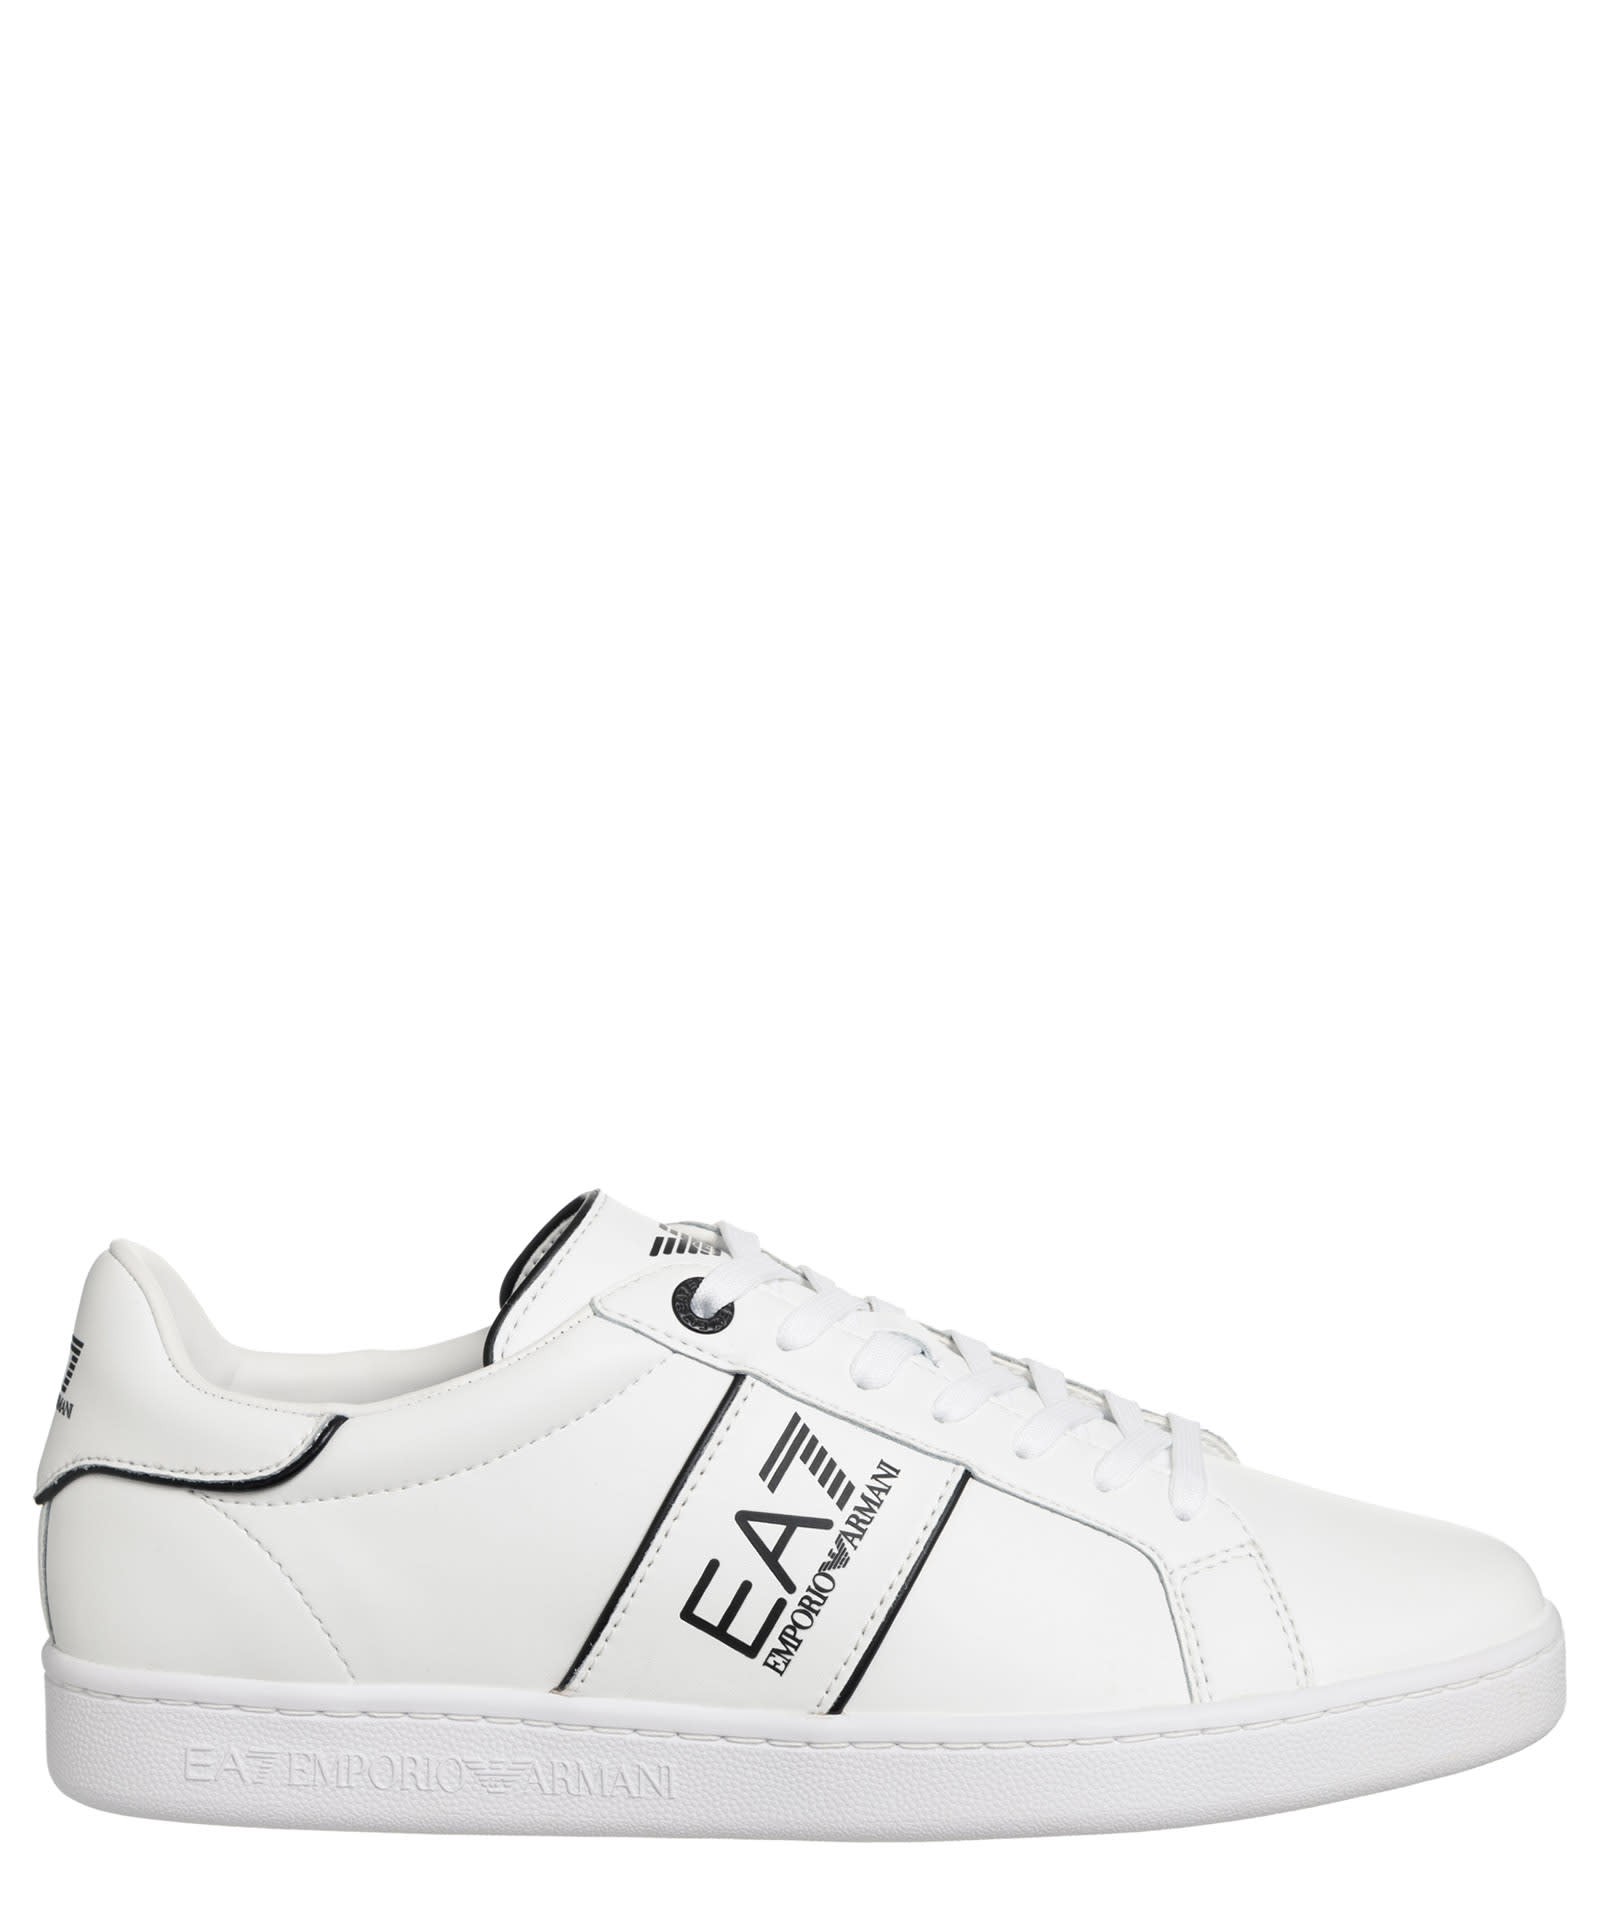 EA7 CLASSIC LEATHER SNEAKERS